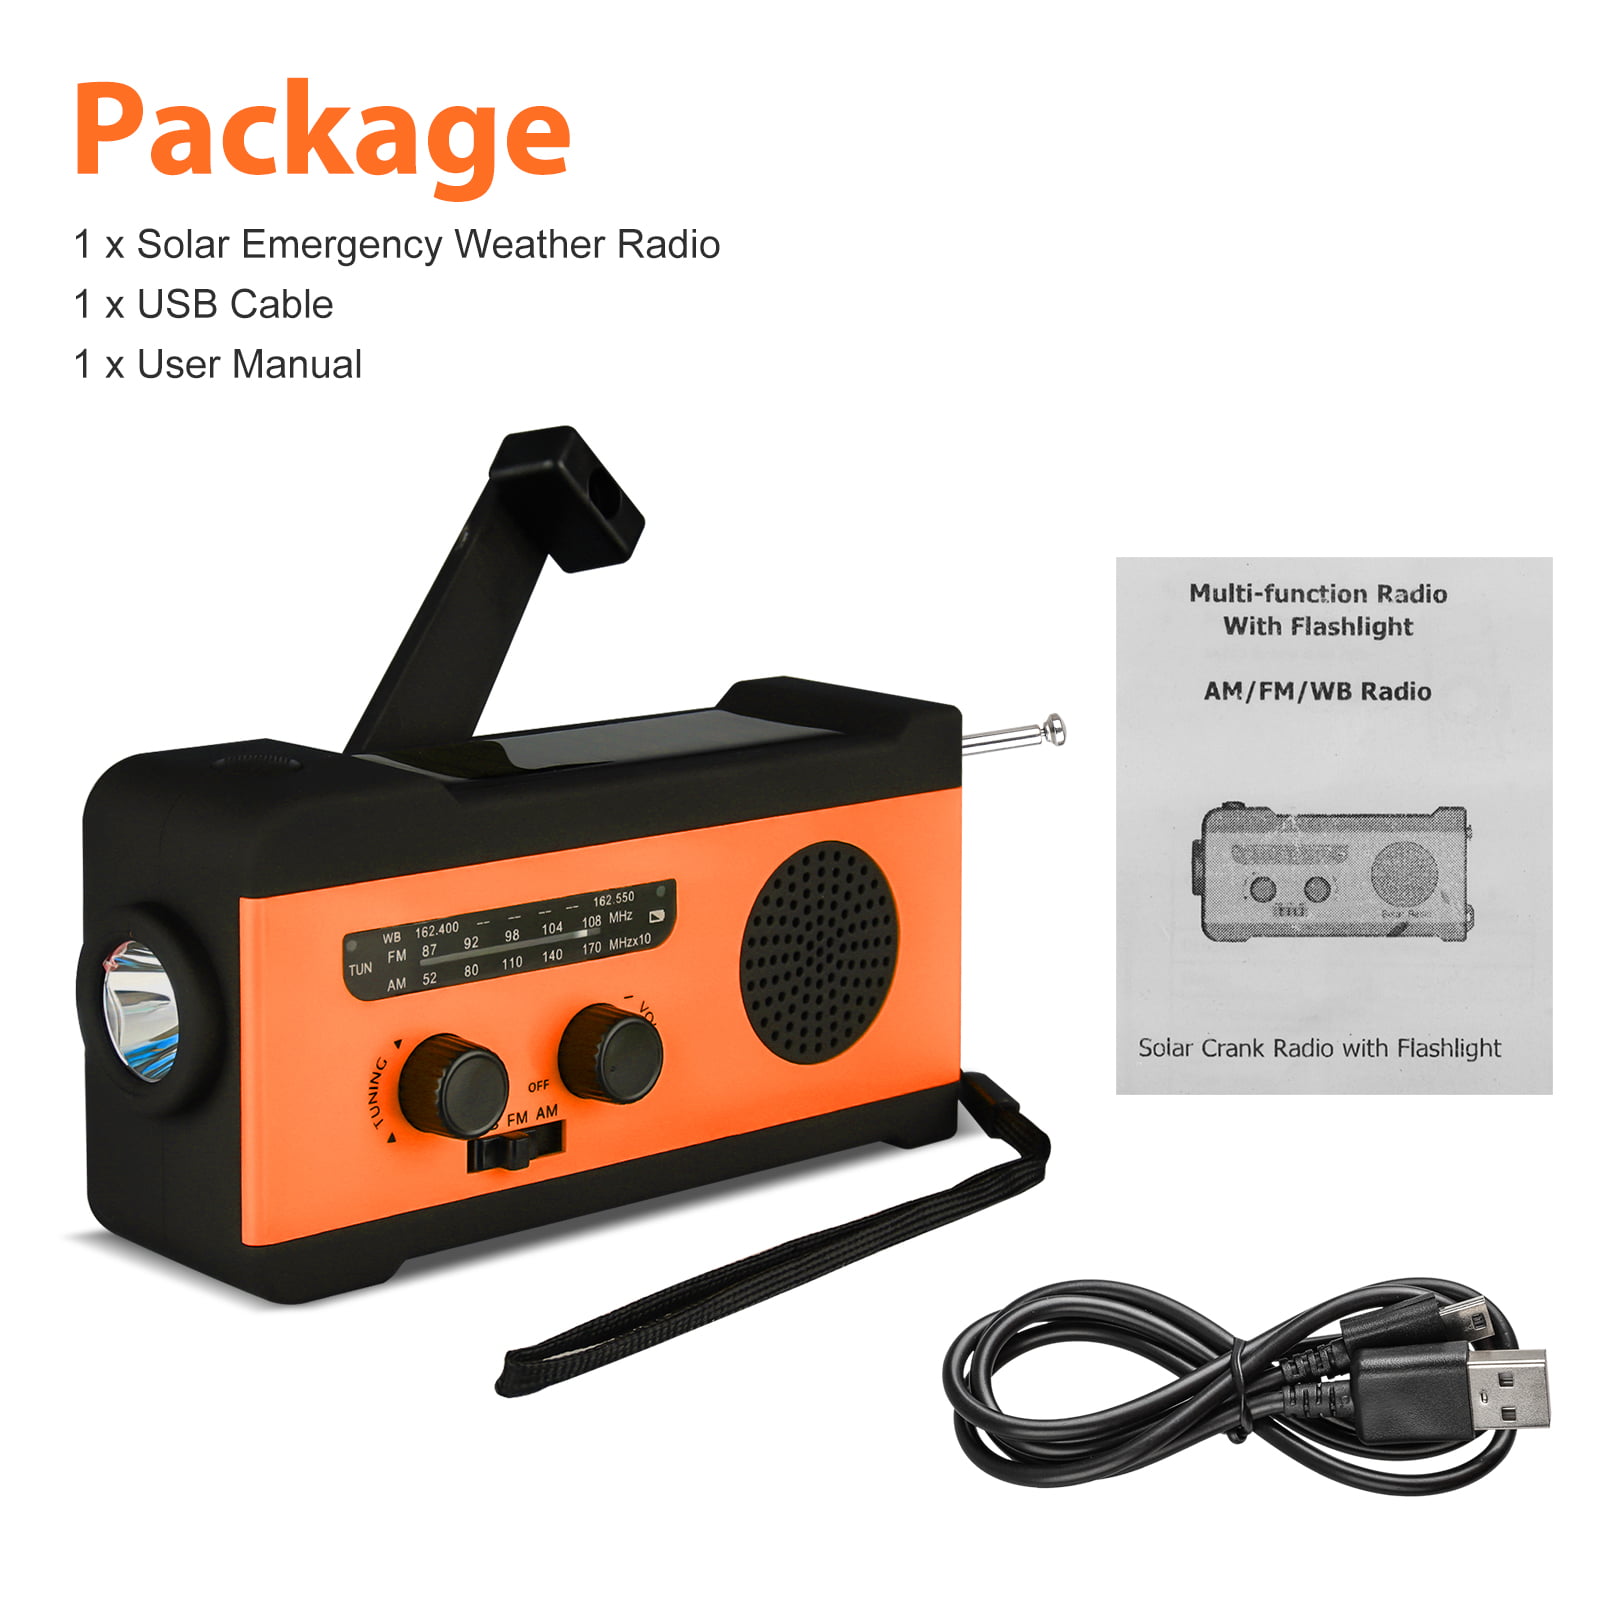 Emergency Power Bank for Cellphones ThorFire Emergency Solar Hand Crank Portable Radio LED Flashlight NOAA Weather Radio for Household and Outdoor Emergency with AM/FM 4 Charging Modes 